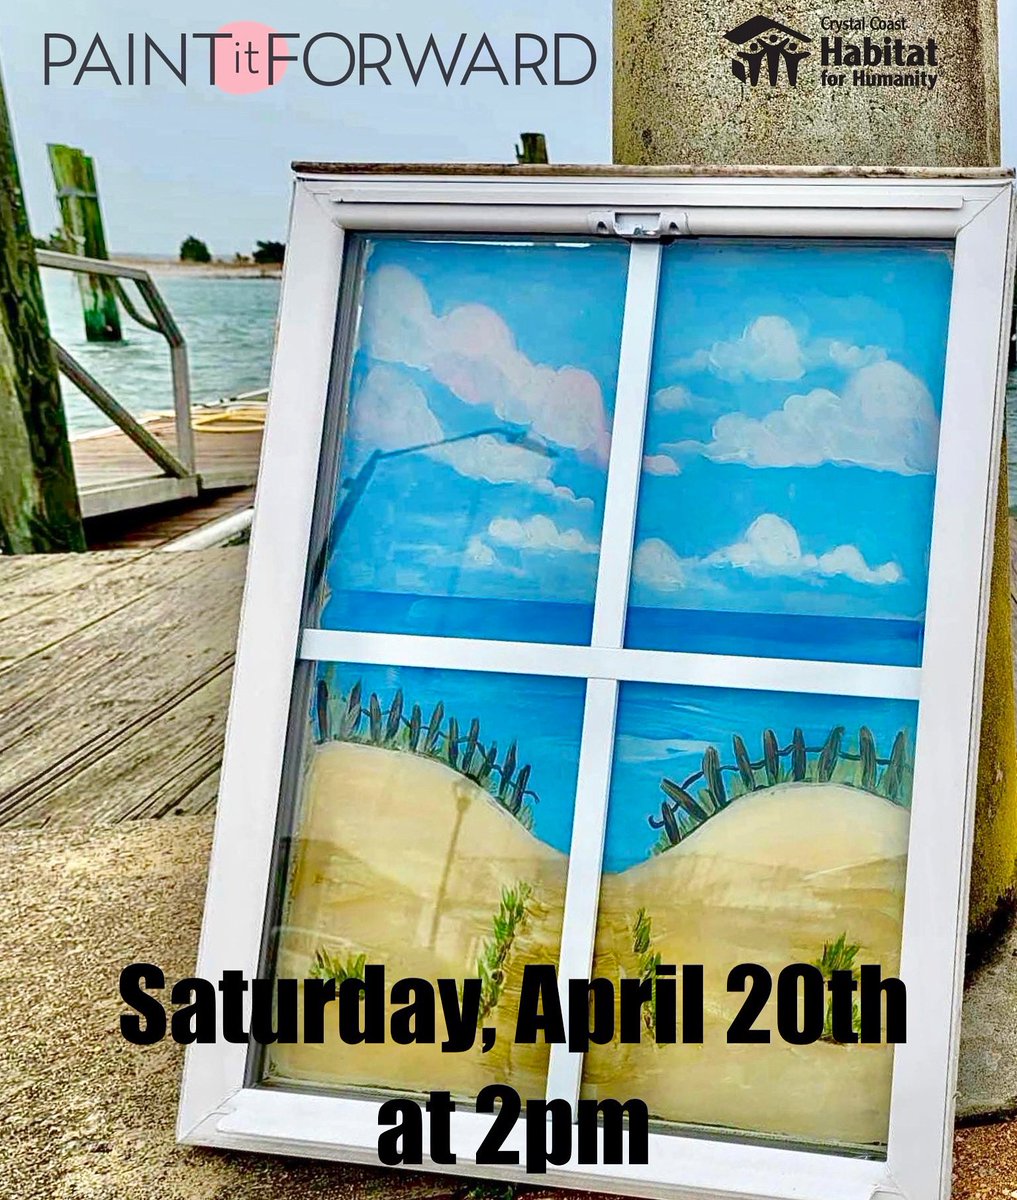 We are excited to be connecting with our friends from @wineanddesignMC and Crystal Coast Habitat for Humanity for a special fundraising event this Saturday, with a step-by-step painting event of window panes! Buy your tickets here: wineanddesign.com/calendar/moreh…